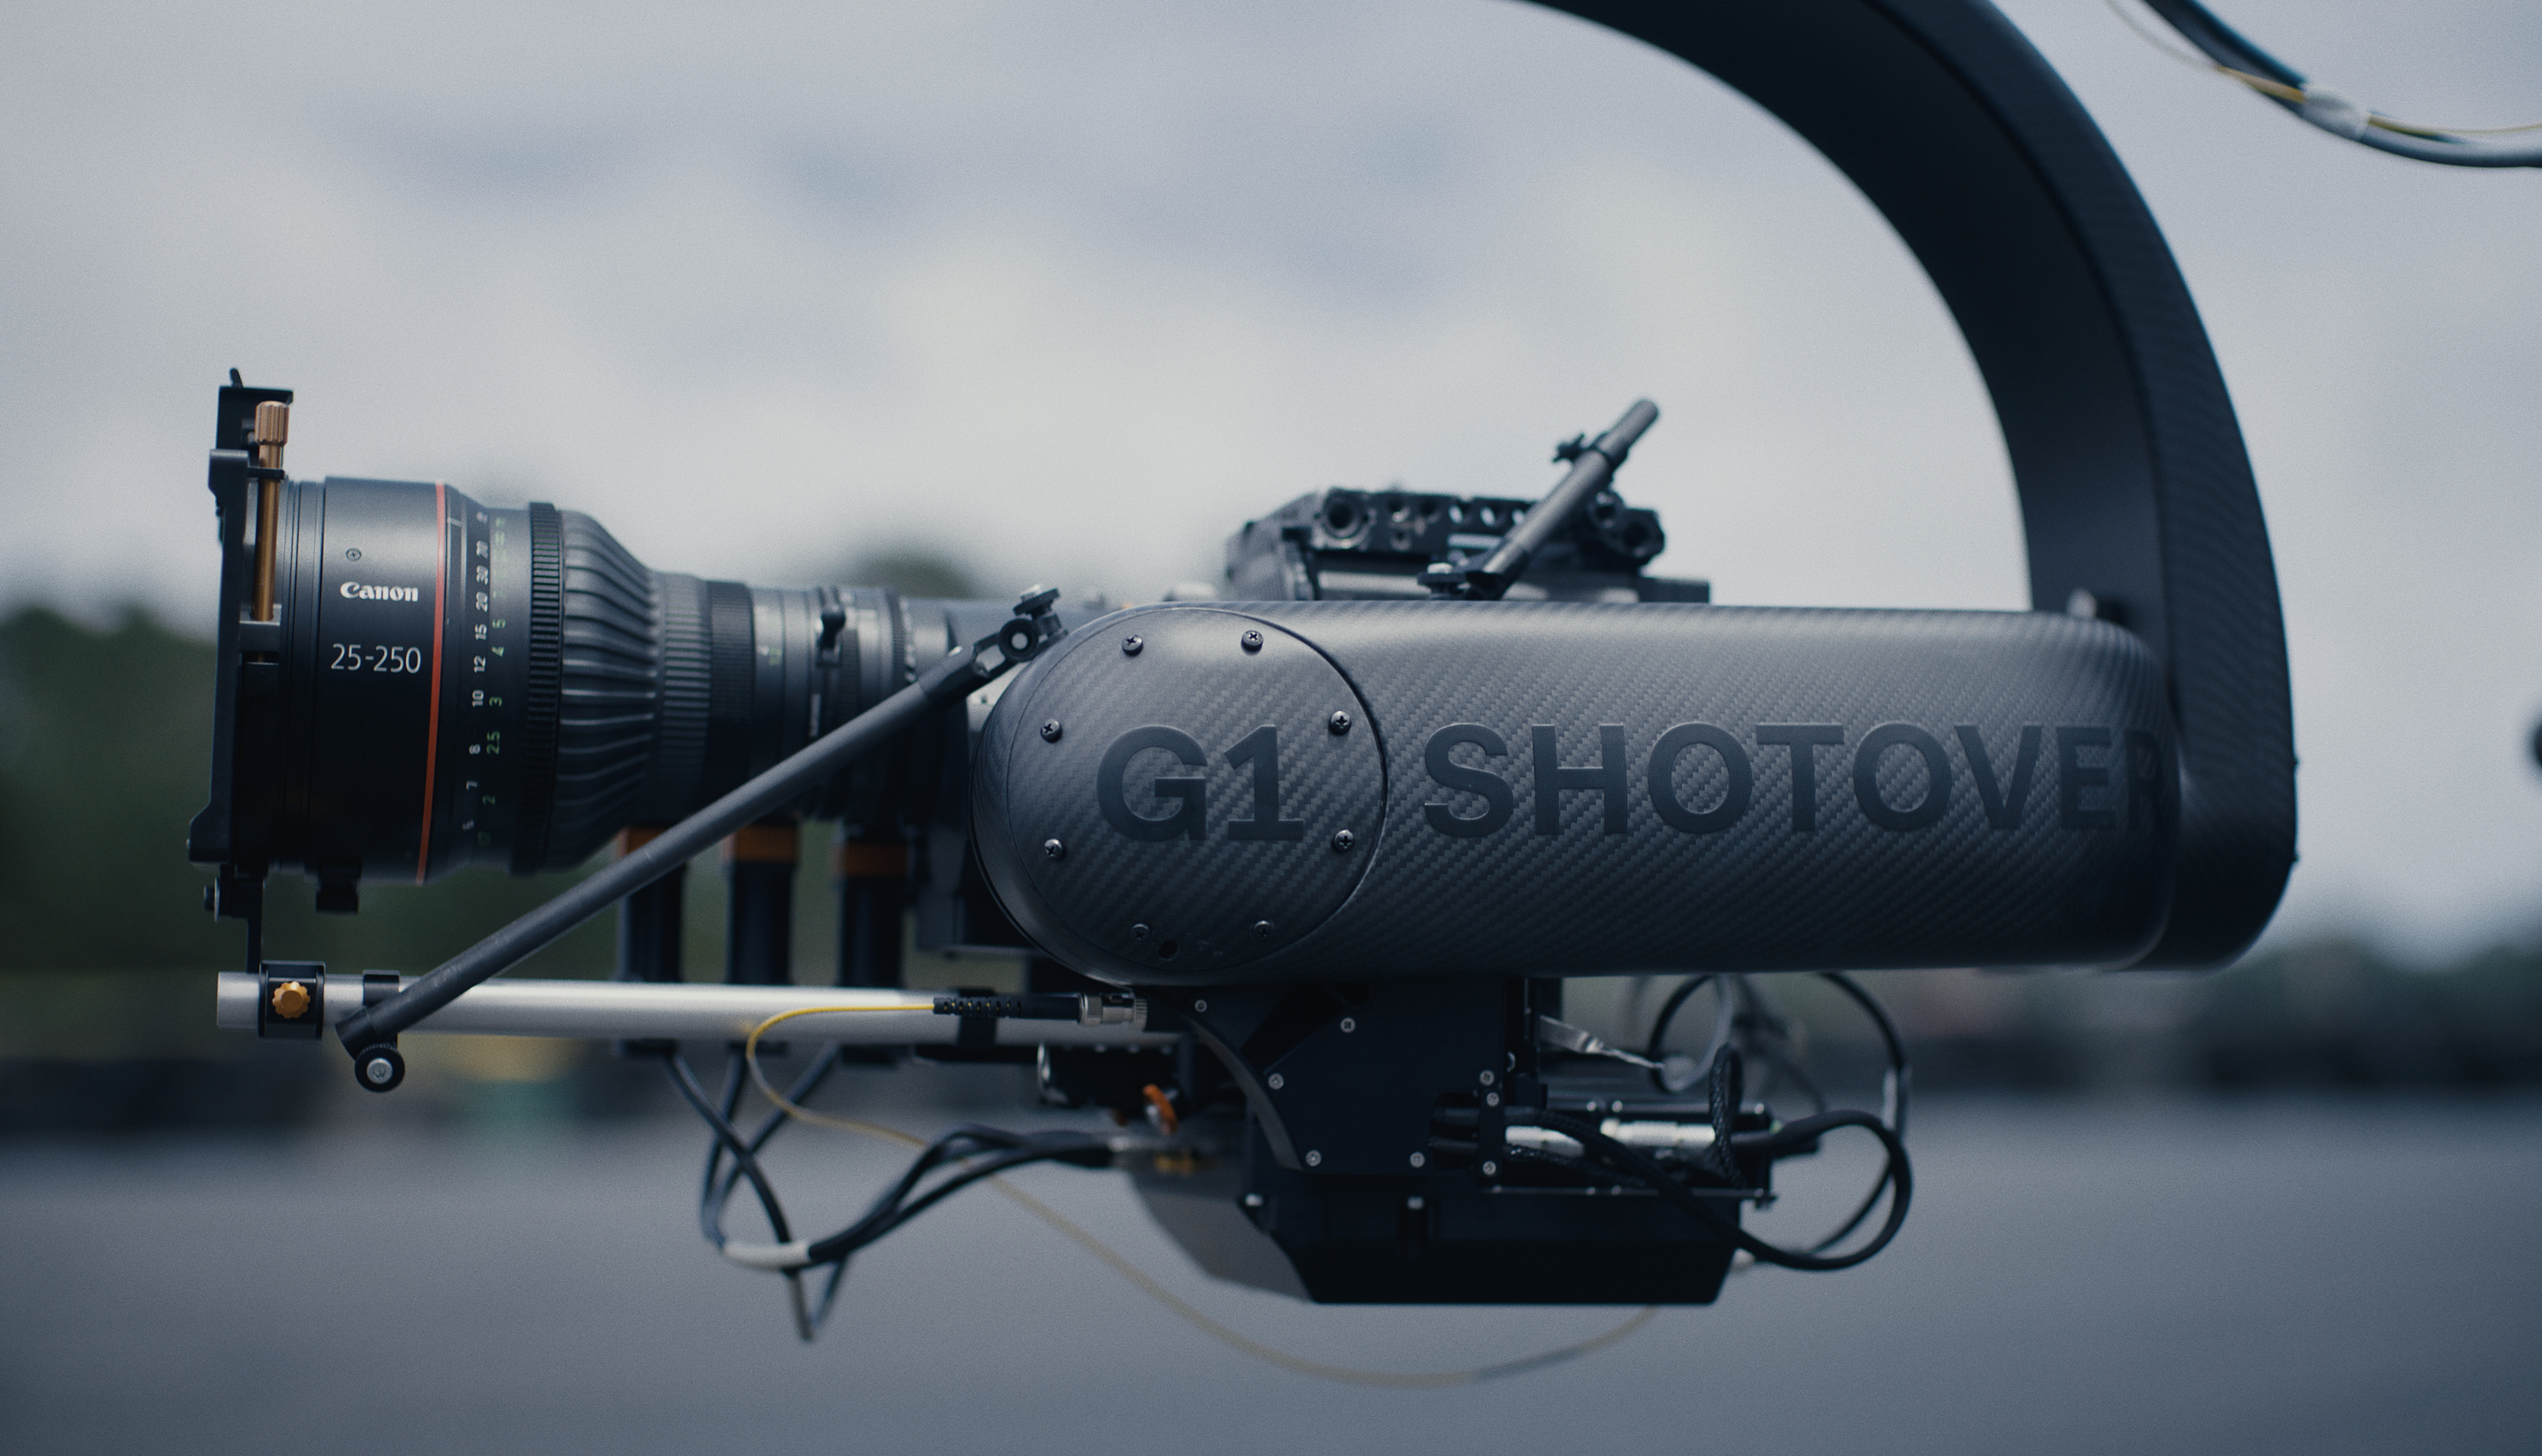 SHOTOVER G1 High Torque - Speed Test with ReedFactory and Mad Mike Whiddett